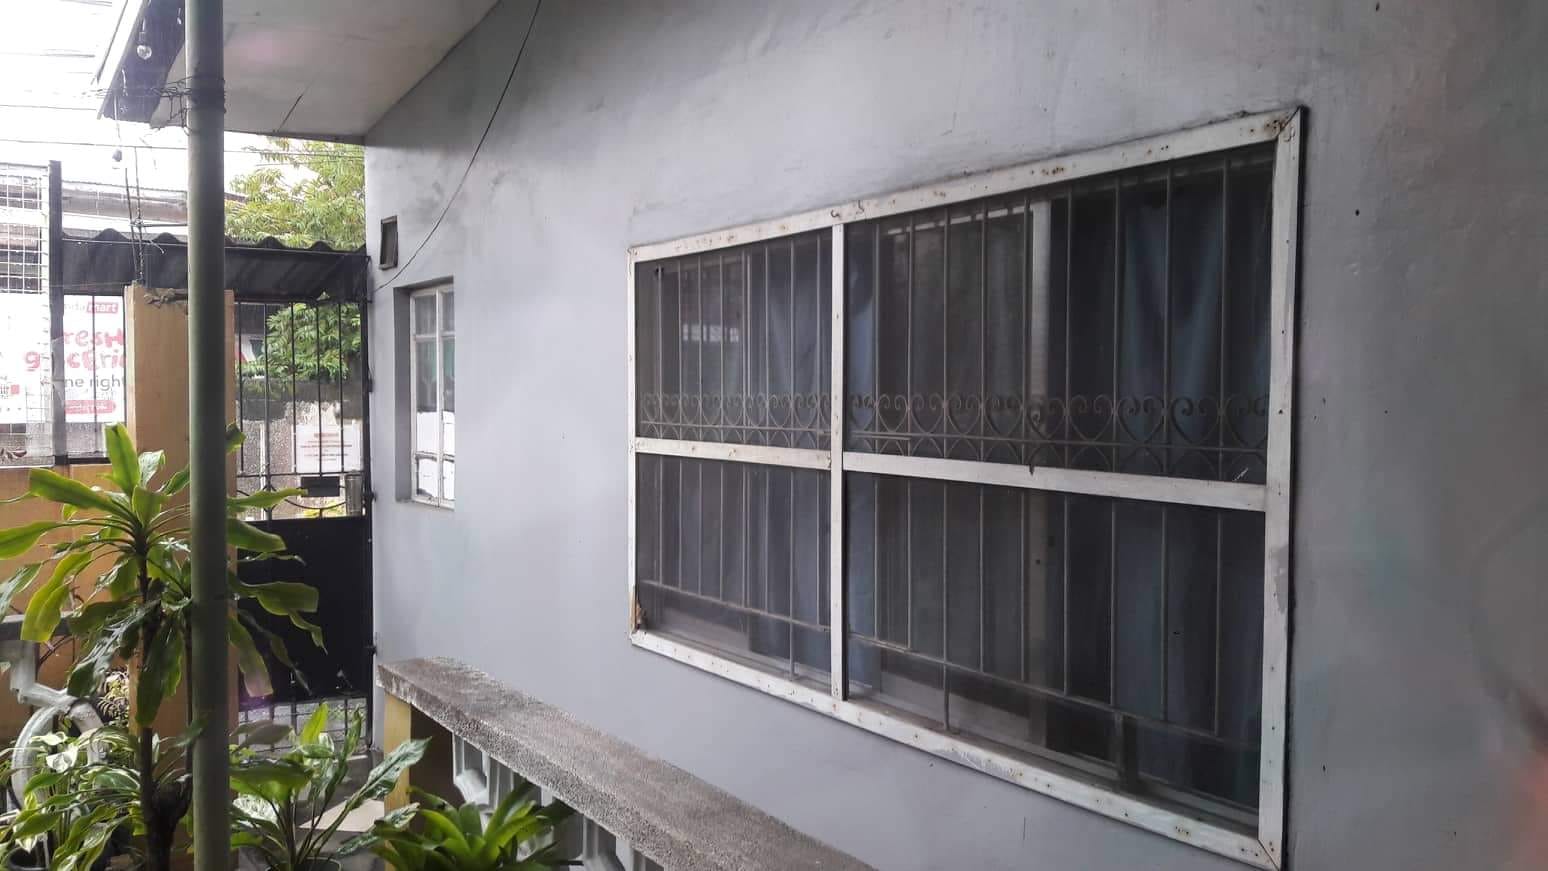 Lady bedspace for rent in Gatchalian Subd Las Pinas